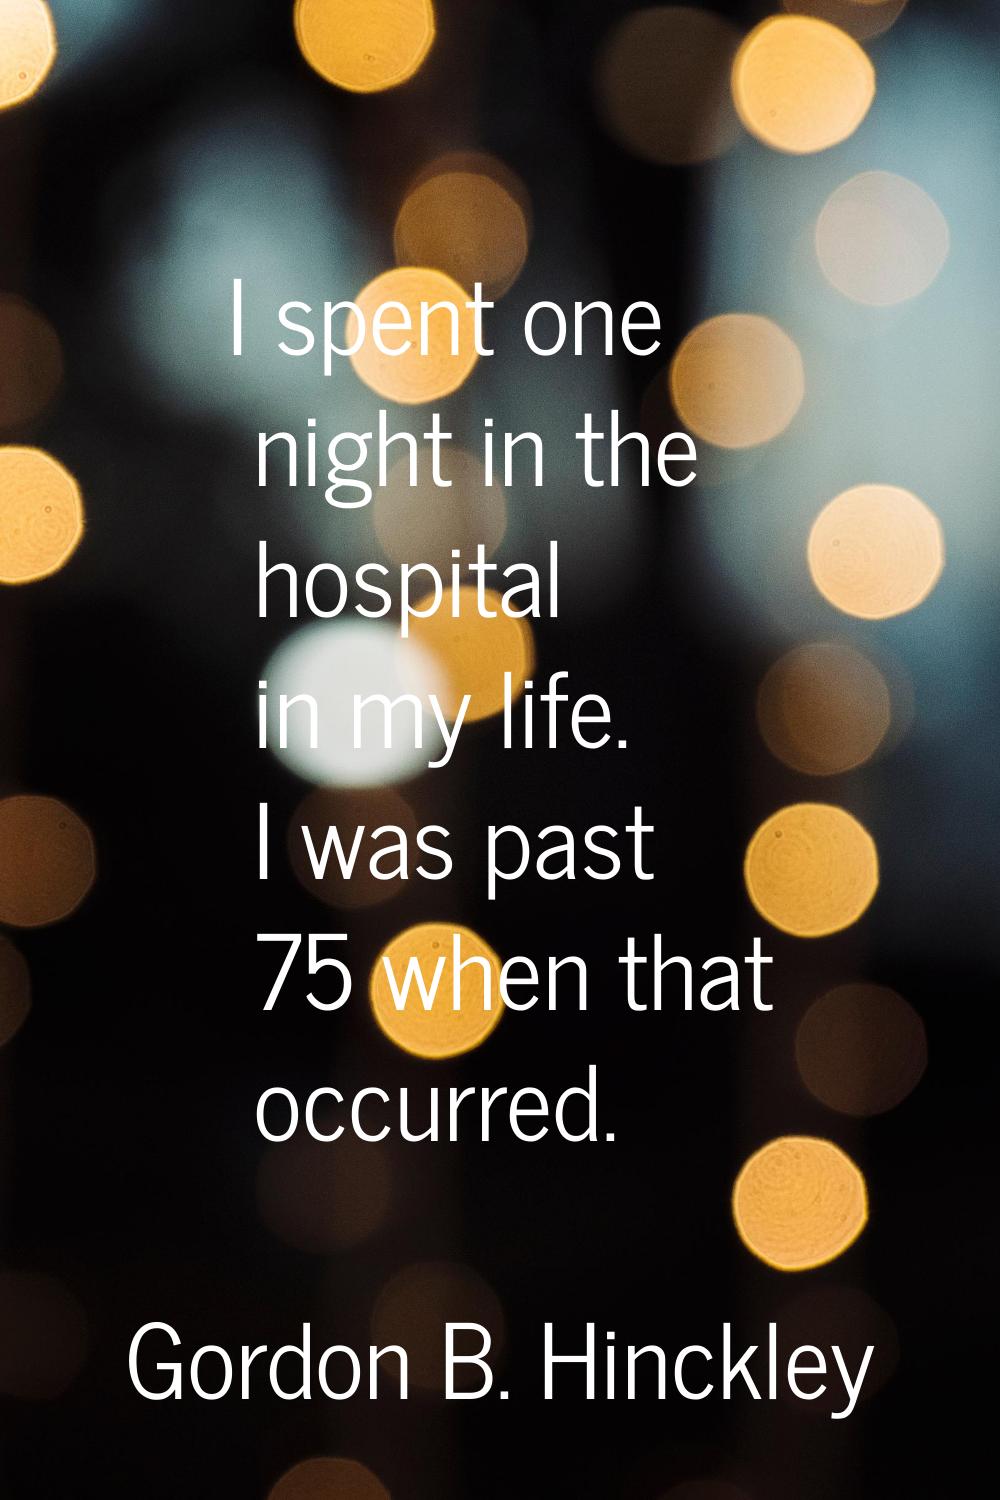 I spent one night in the hospital in my life. I was past 75 when that occurred.